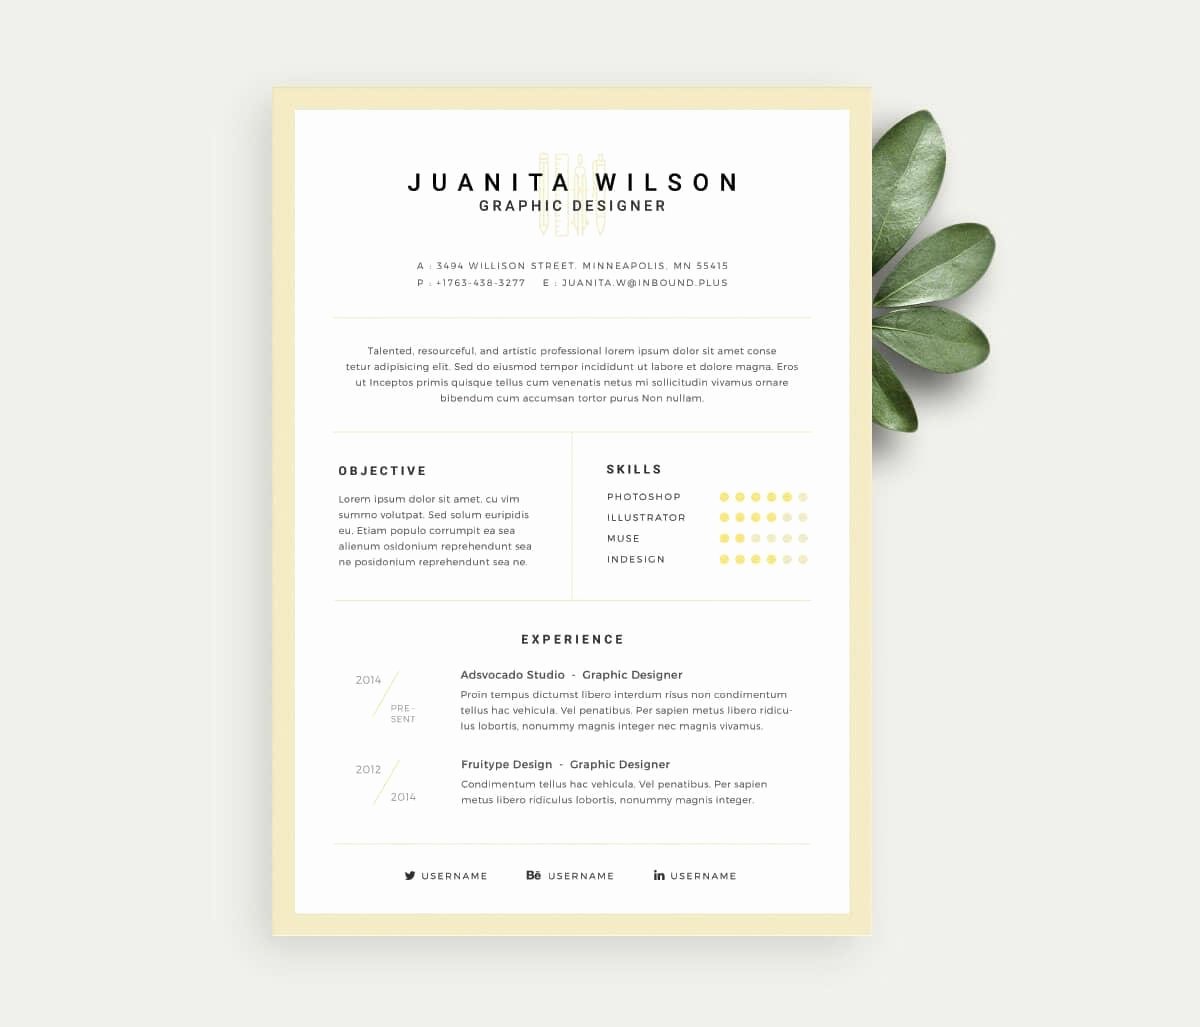 Free Resume Templates 17 Downloadable Resume Templates to Use